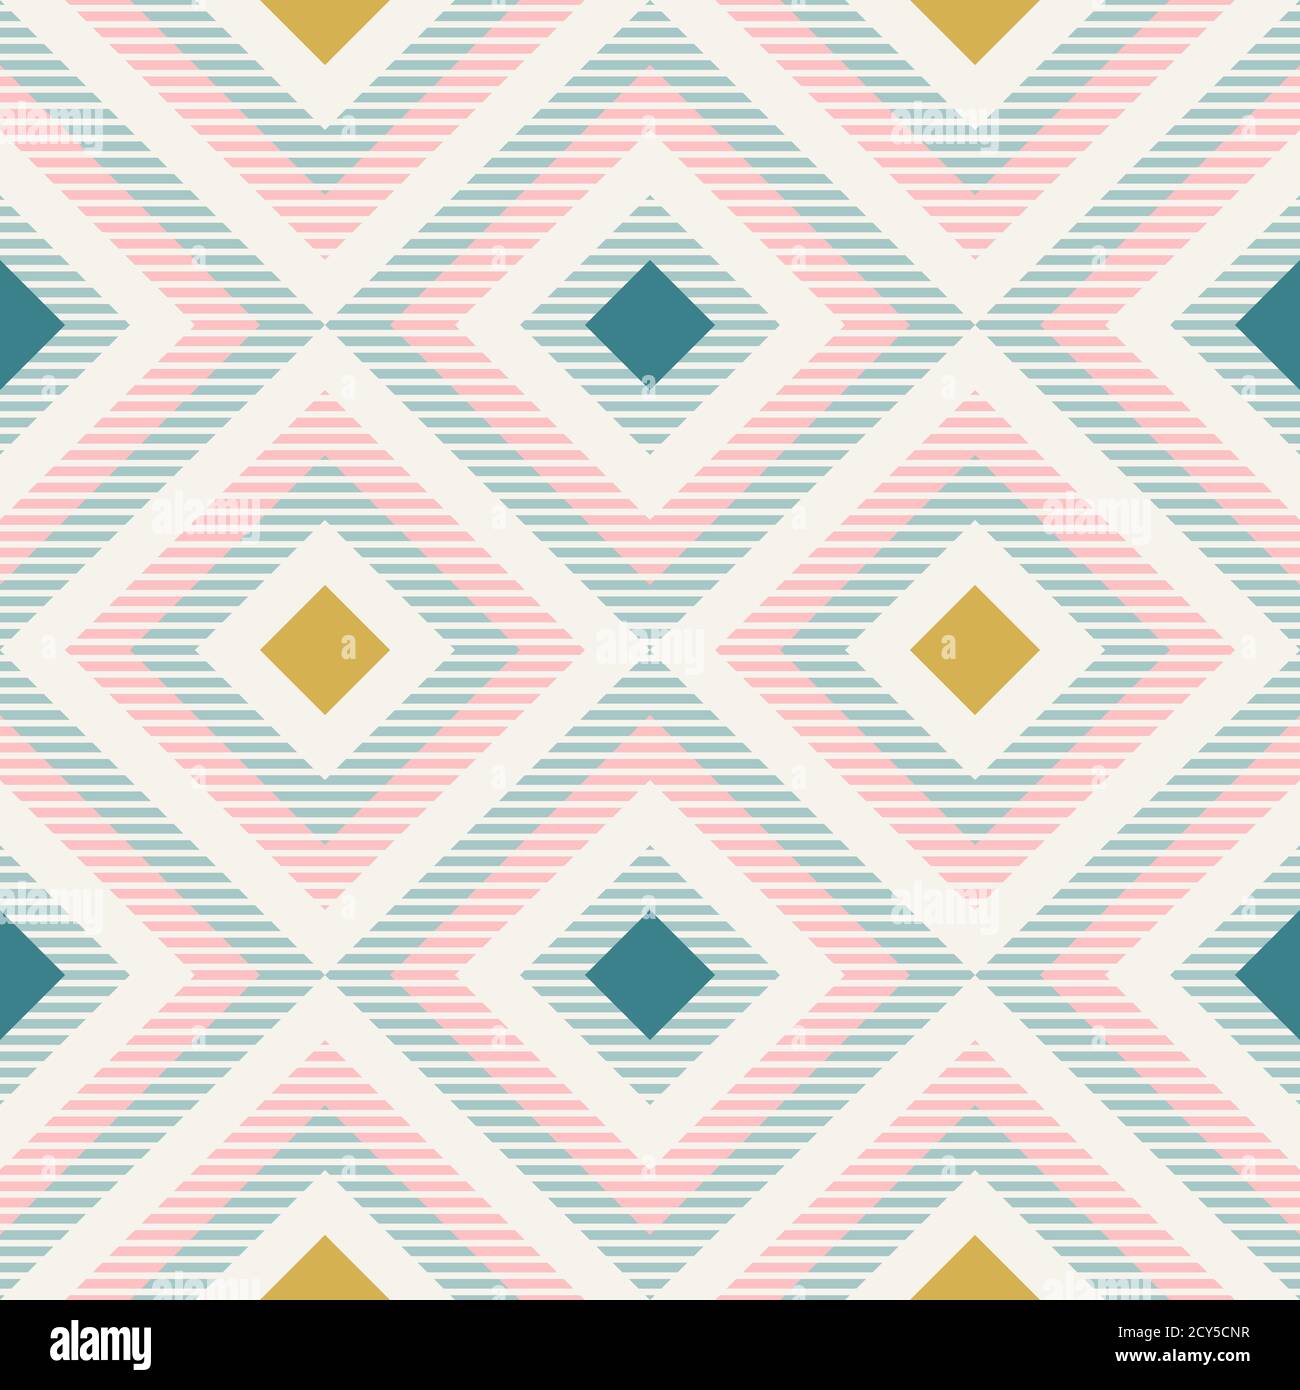 Abstract geometry in retro colors, diamond shapes geo pattern. Seamless vector pattern. Mint and coral pink background. Fashion fabric pattern design. Stock Vector